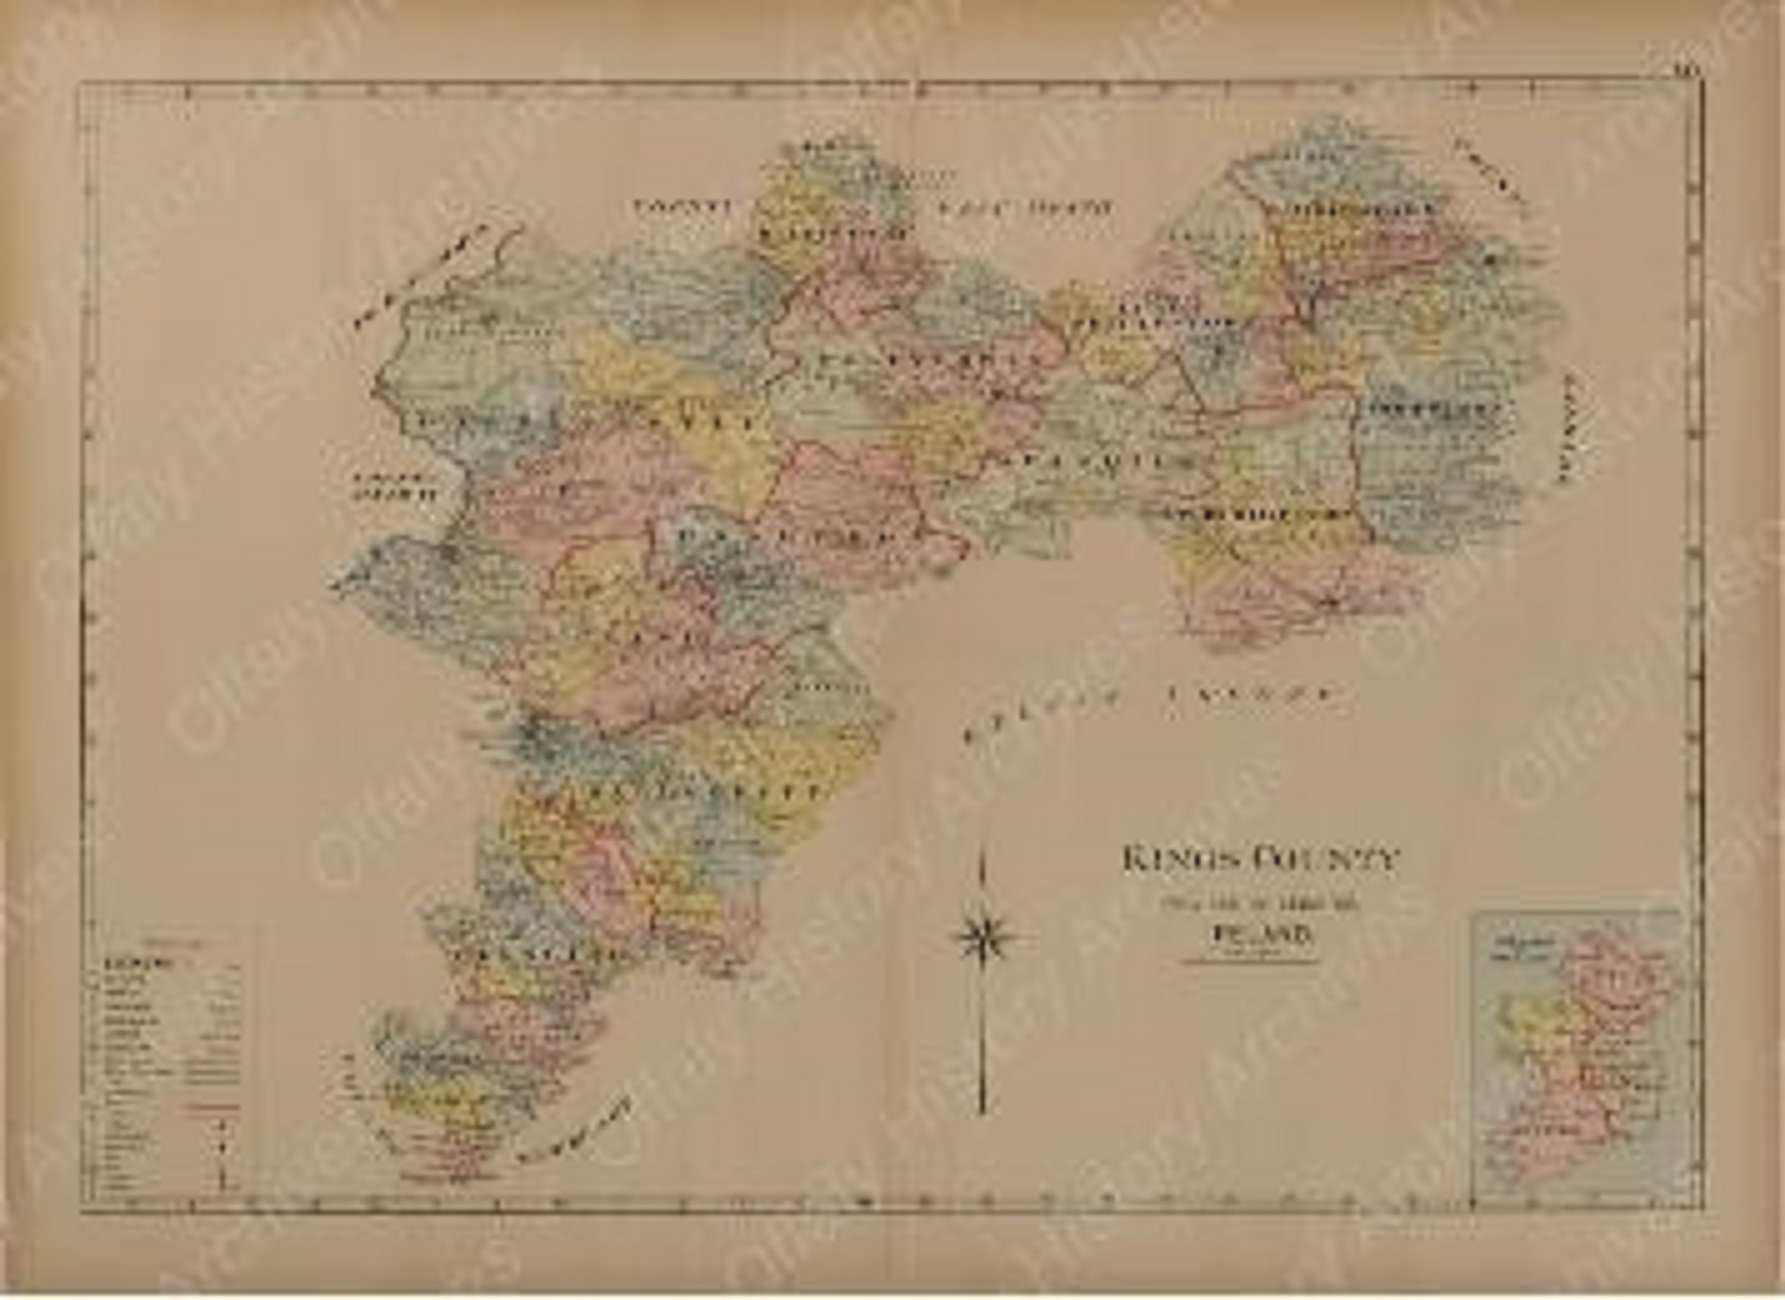 King's County Map 1901, A2, 10 euro - Offaly History